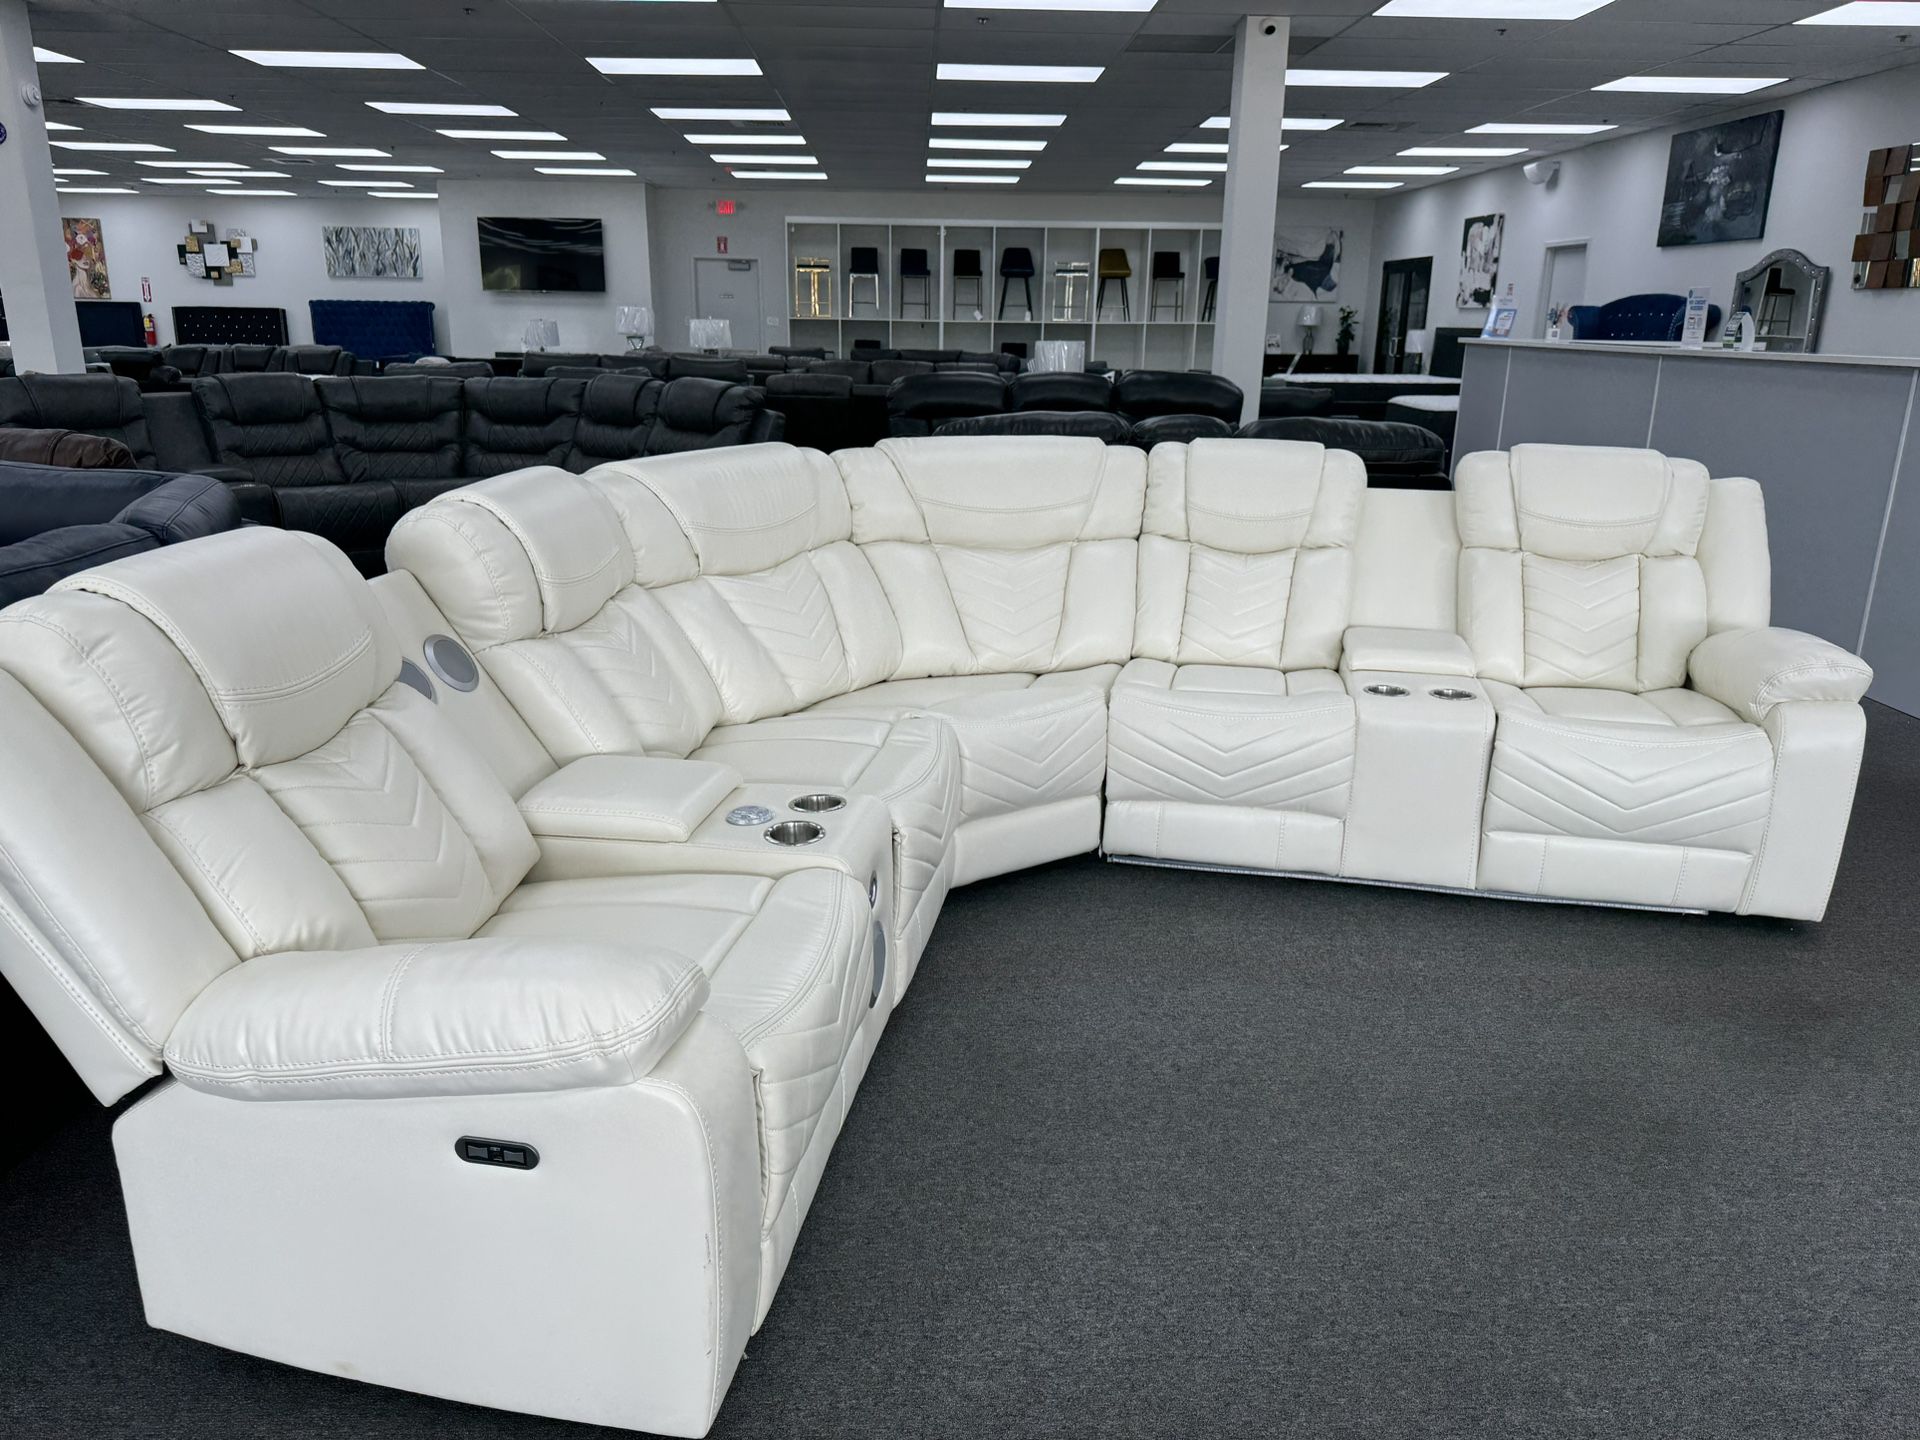 Deluxe Power Reclining Sectional with Built-In Speakers and Amenities